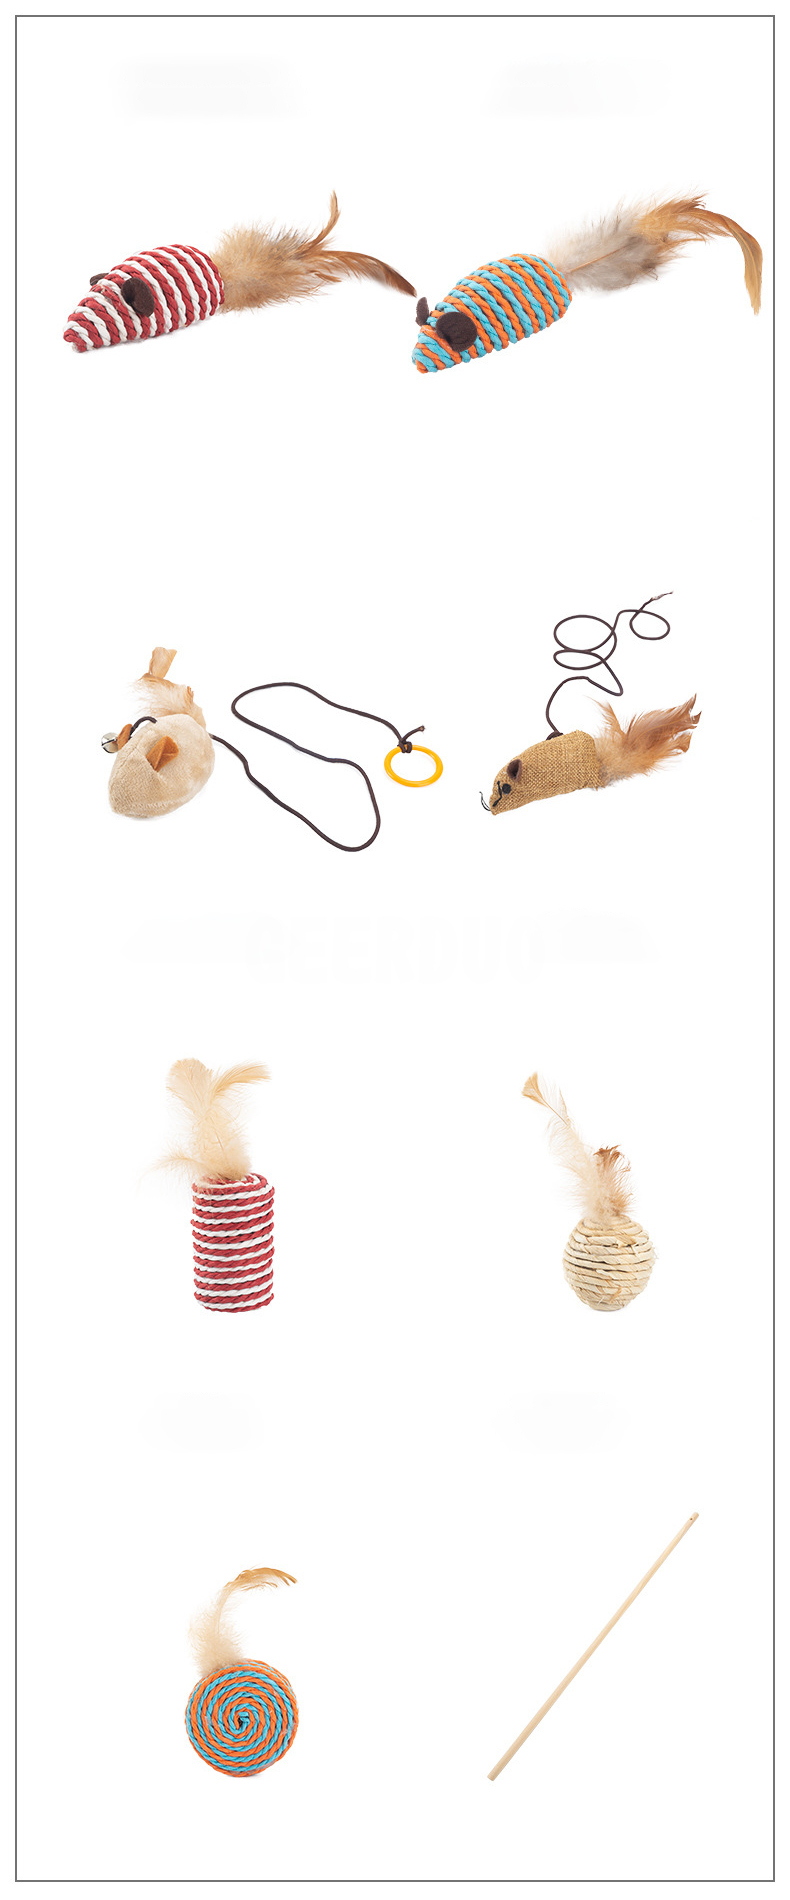 cat funny wand toy (6)